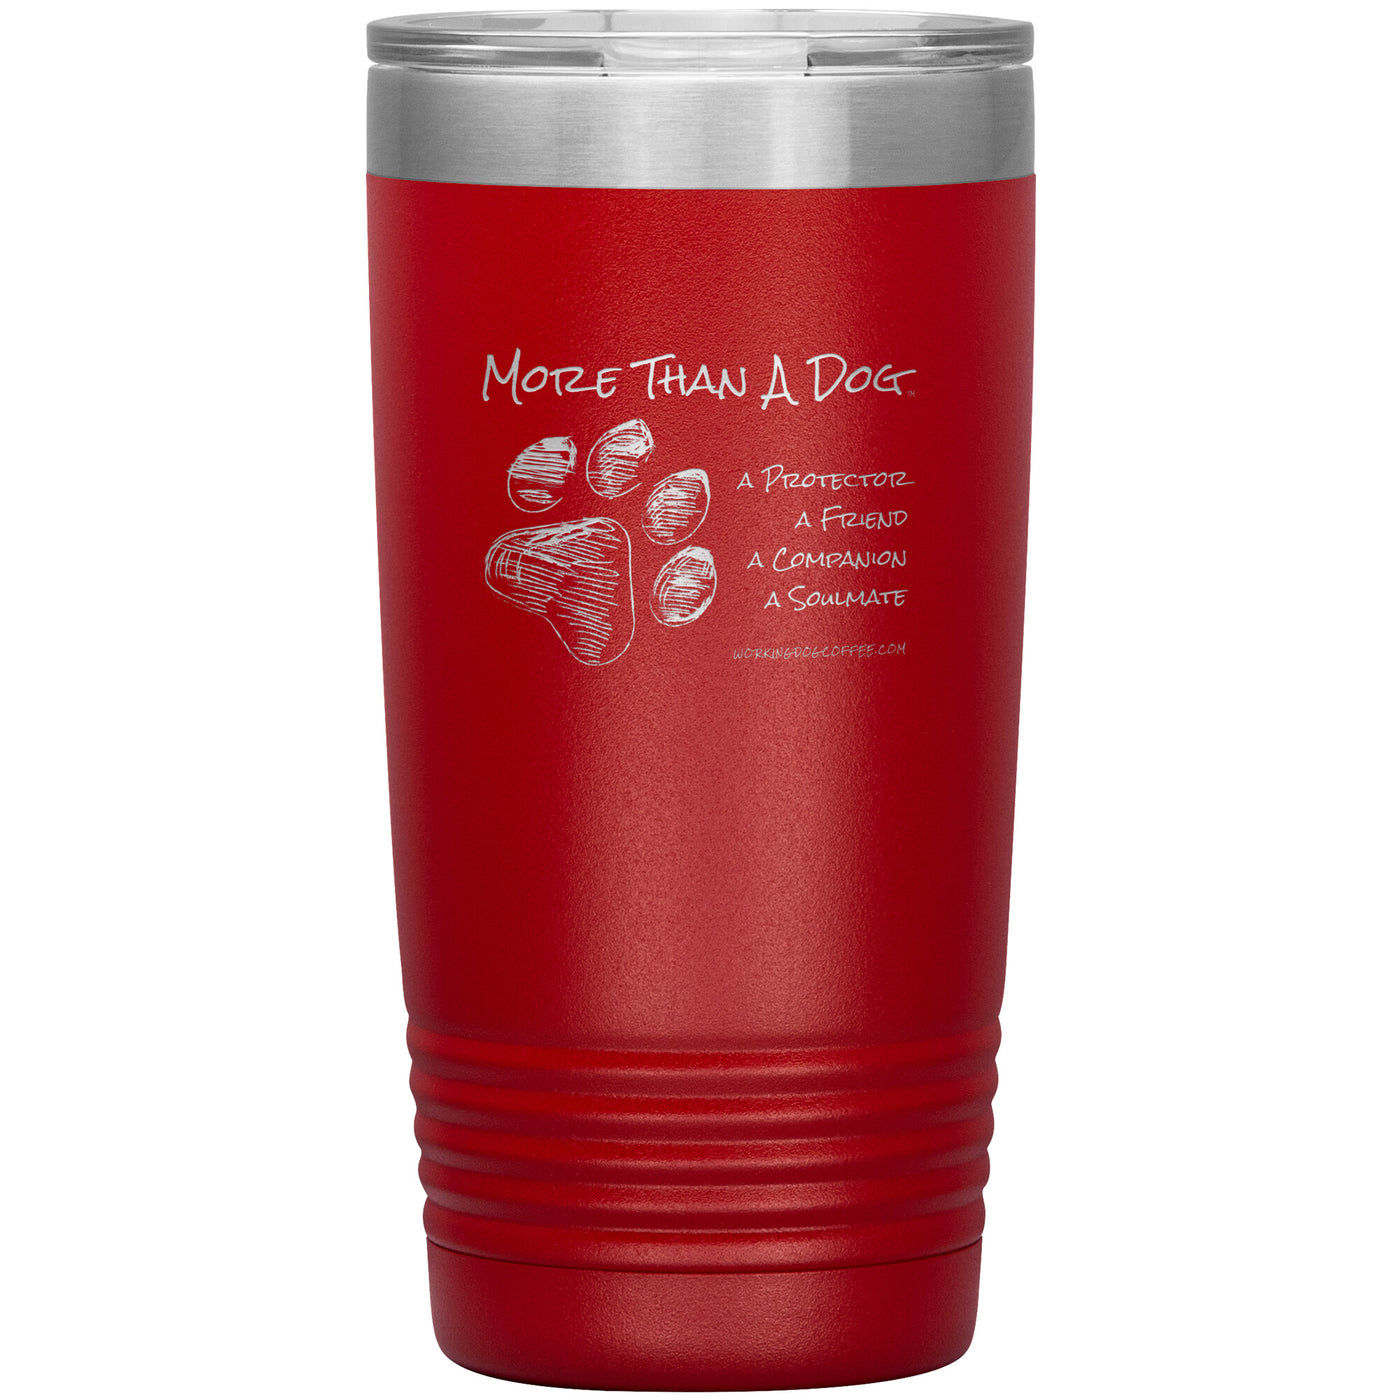 More Than A Dog - Companion Edition, 20oz Stainless Tumbler